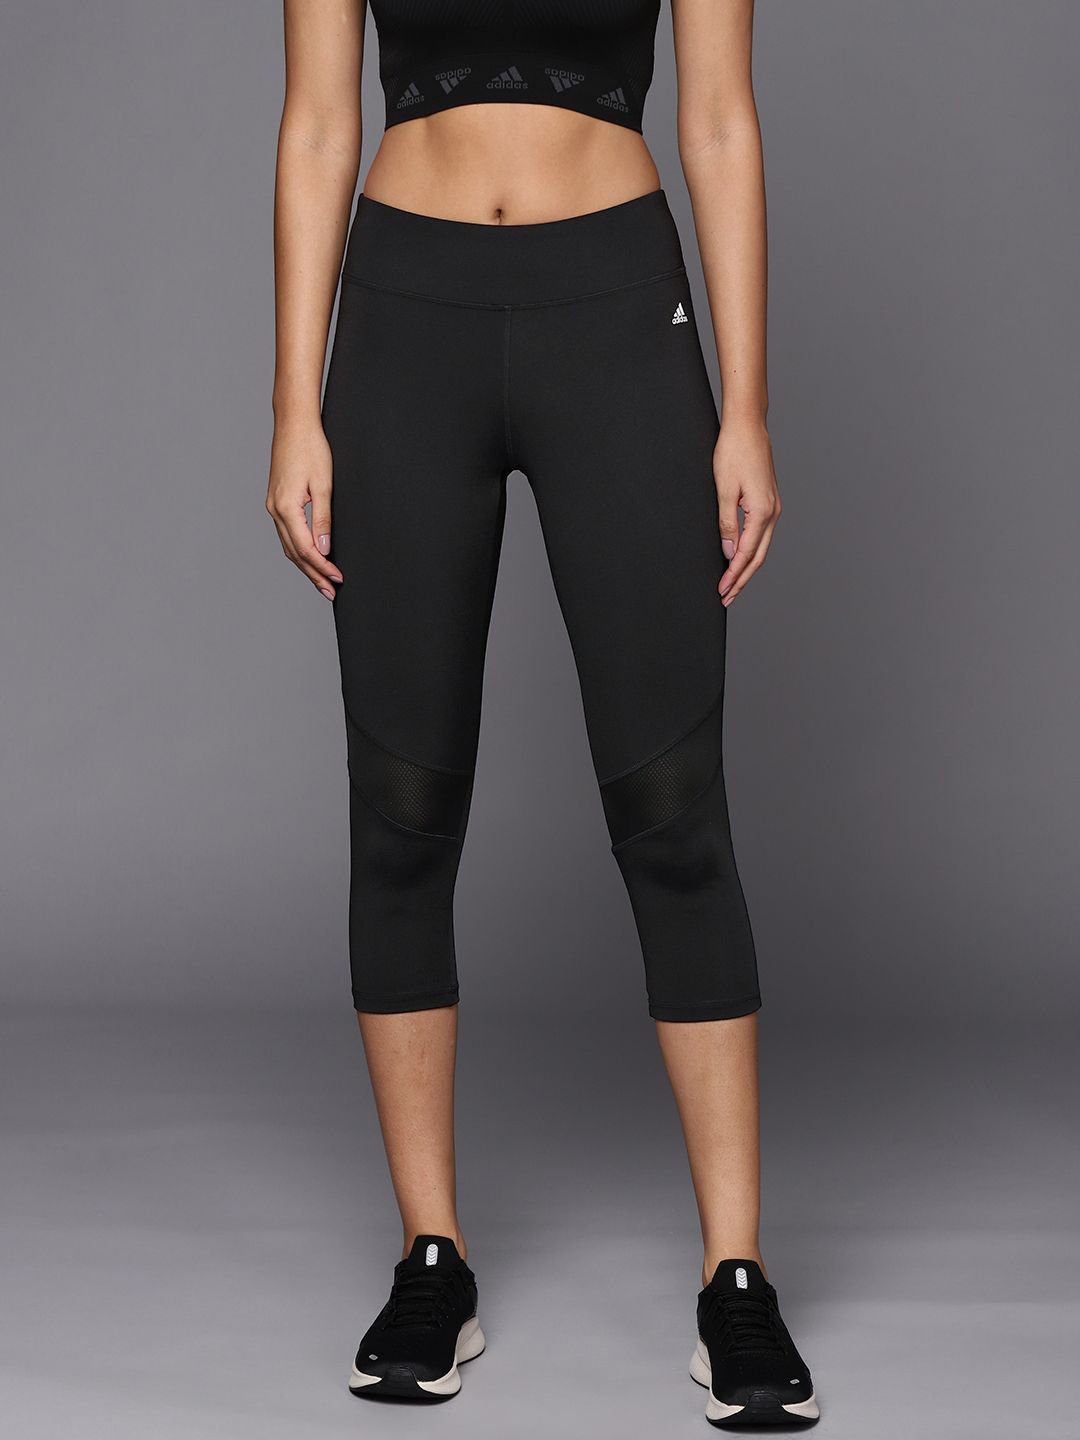 ADIDAS Women Black 3/4 W Solid Training Cropped Tights Price in India